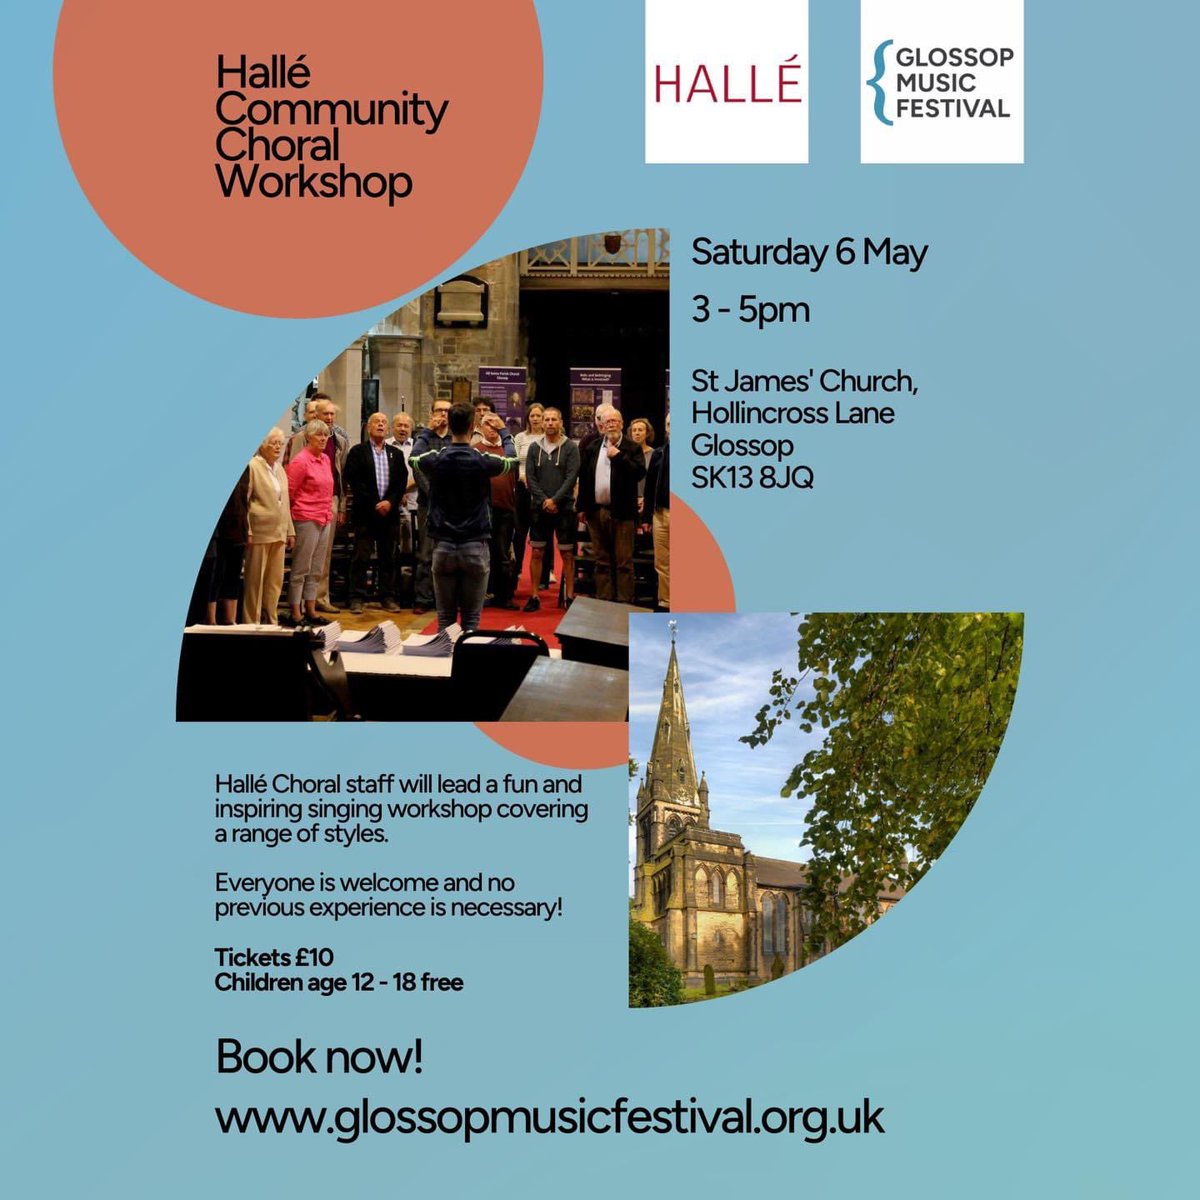 Don't miss our @the_halle Community
Choral Workshop on Sat 6 May!
Hallé Choral experts will cover a wide variety of music and no previous experience is necessary.

BOOK TICKETS: glossopmusicfestival.org.uk
#singingforfun #singingforhealth #glossop